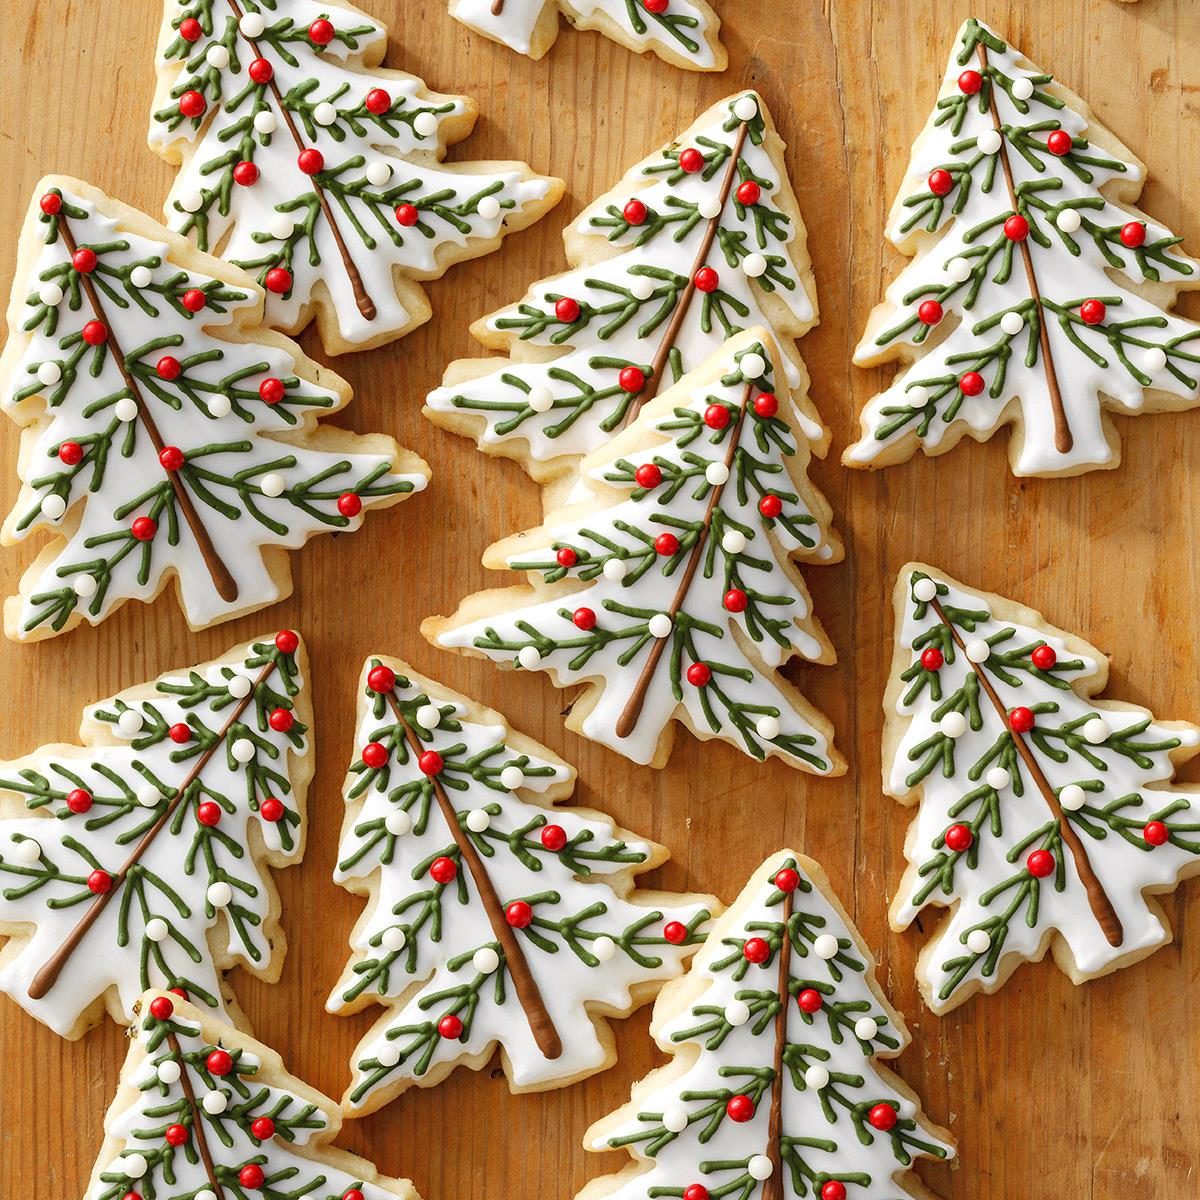 Rosemary Shortbread Christmas Tree Cookies Recipe: How to Make It